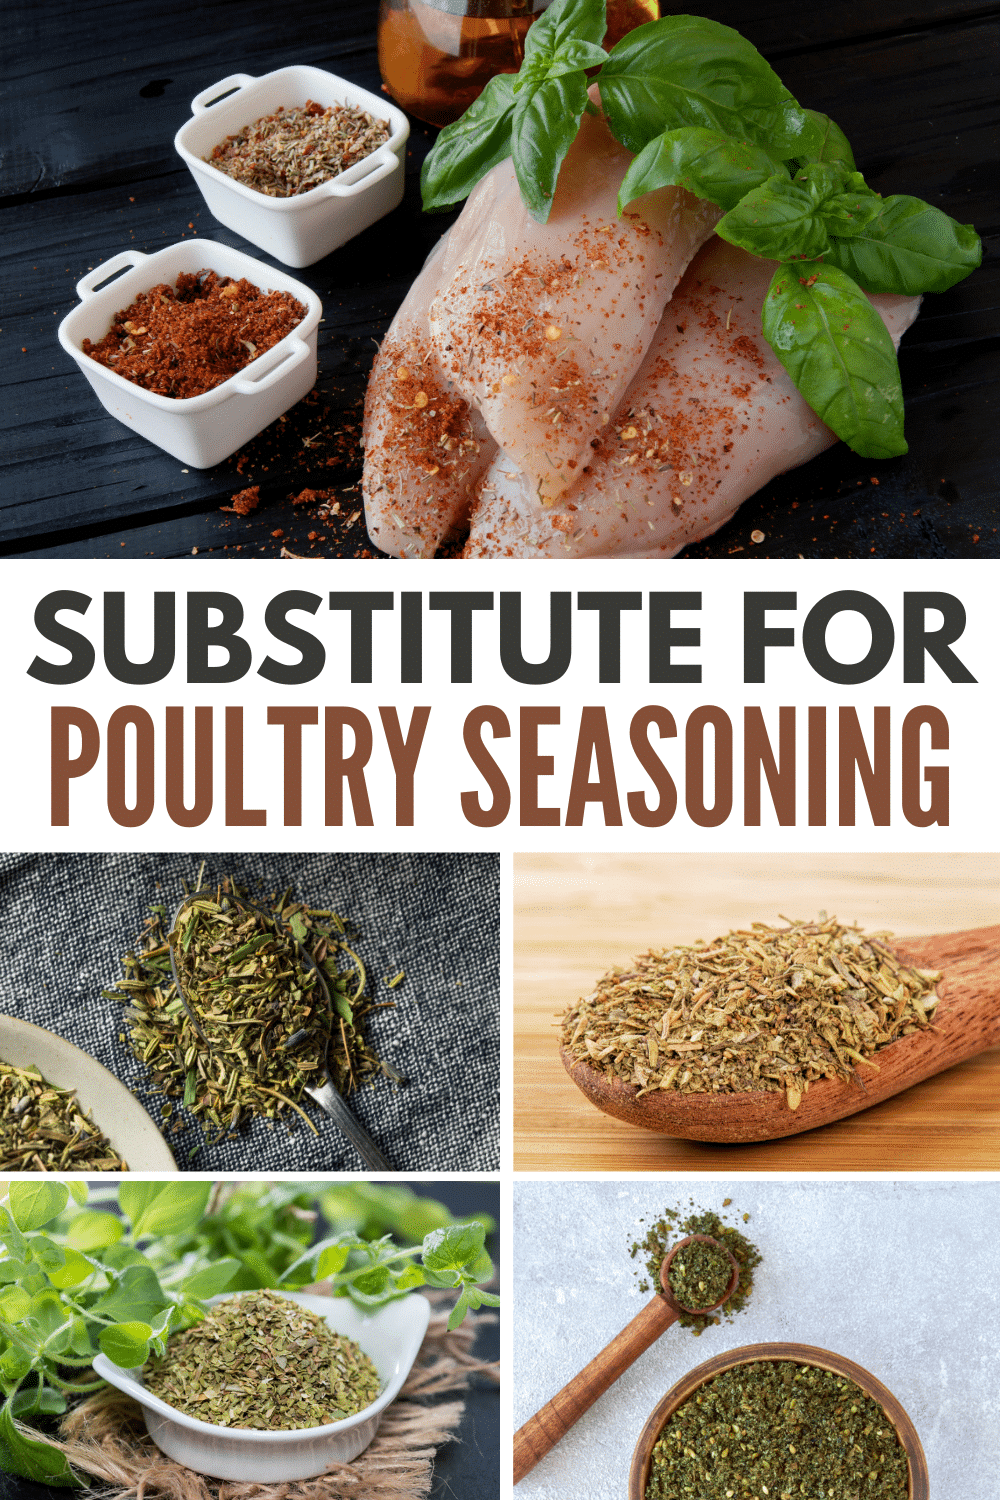 Substitute for poultry seasoning.